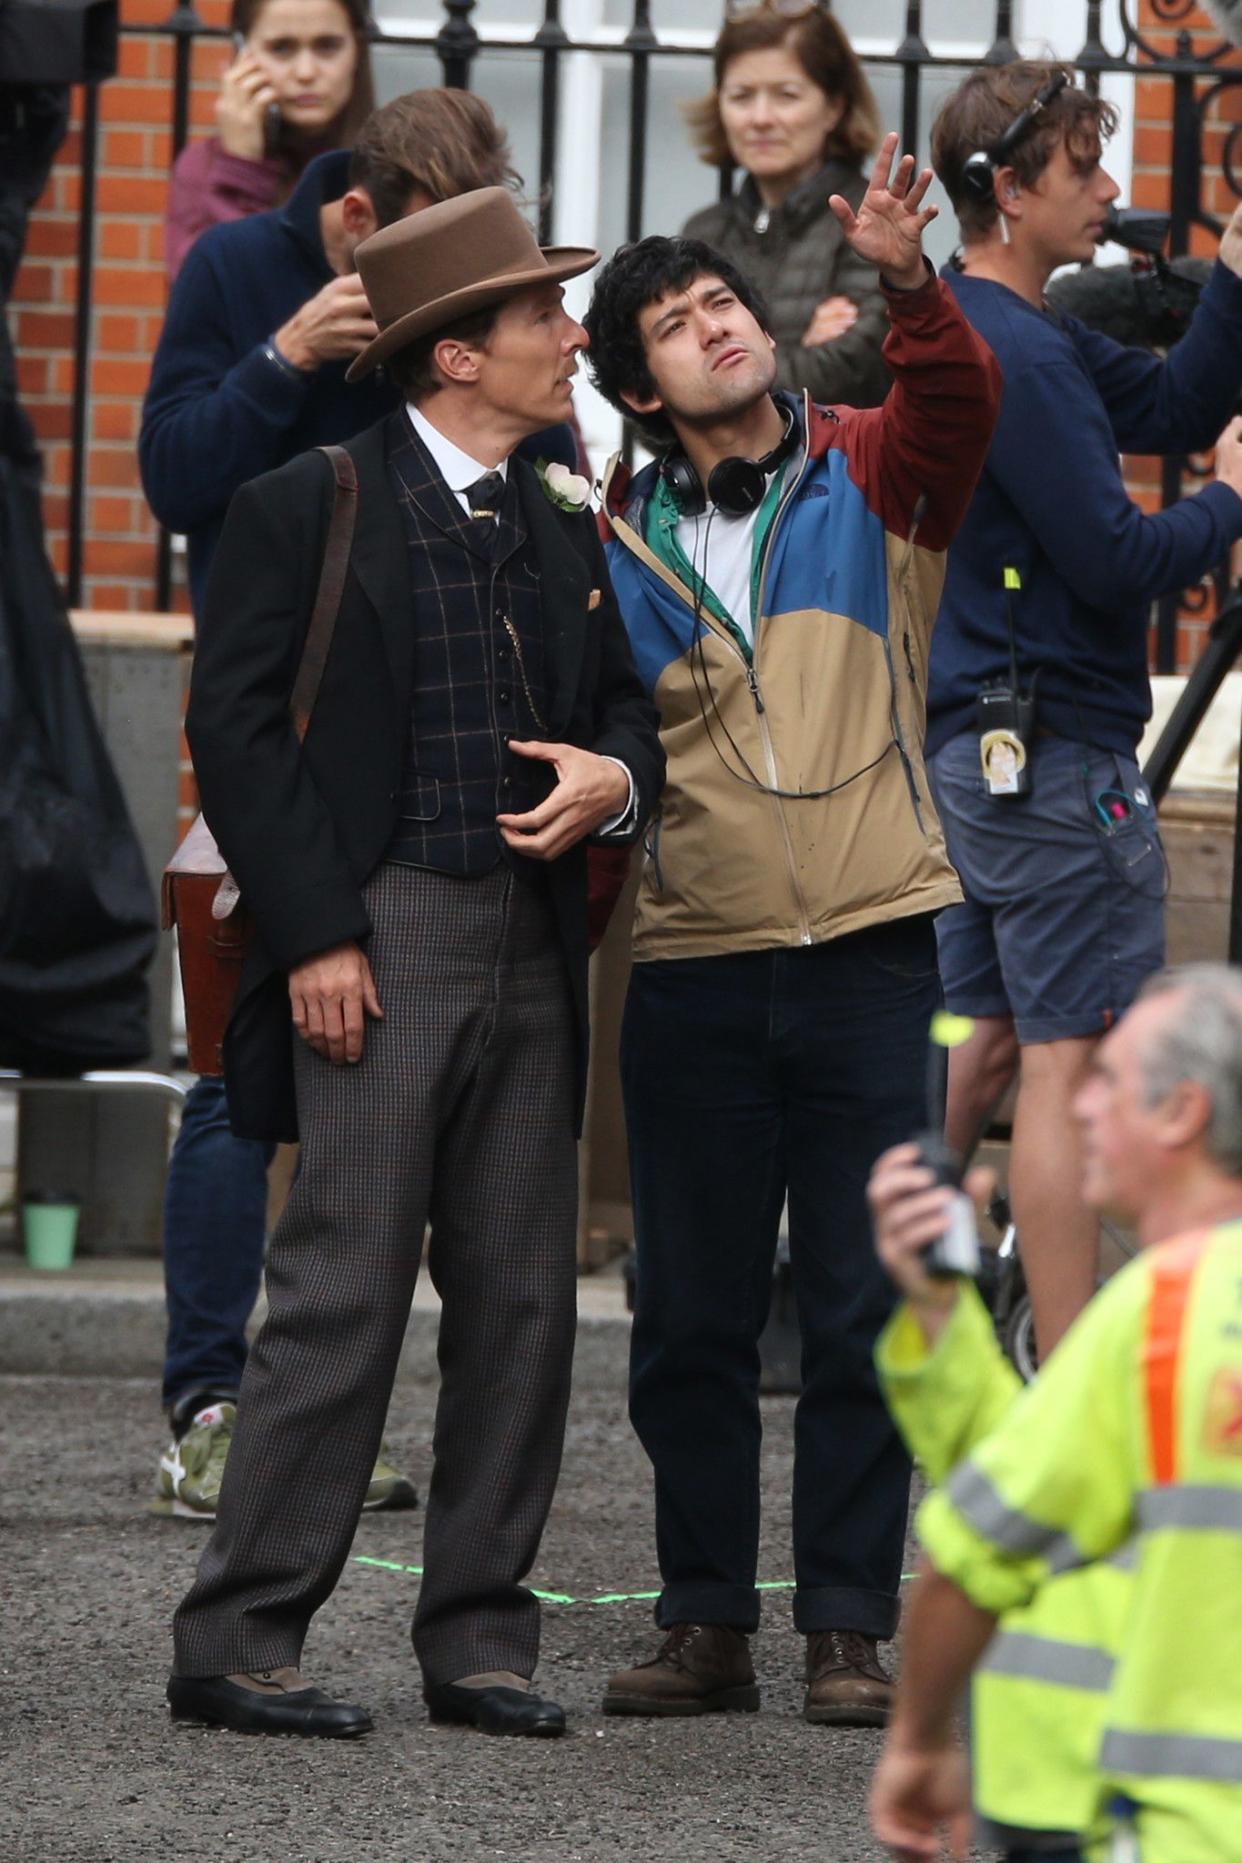 Benedict Cumberbatch is seen filming "Louis Wain," a biographical film on an English artist, in London on Sept. 26, 2019.